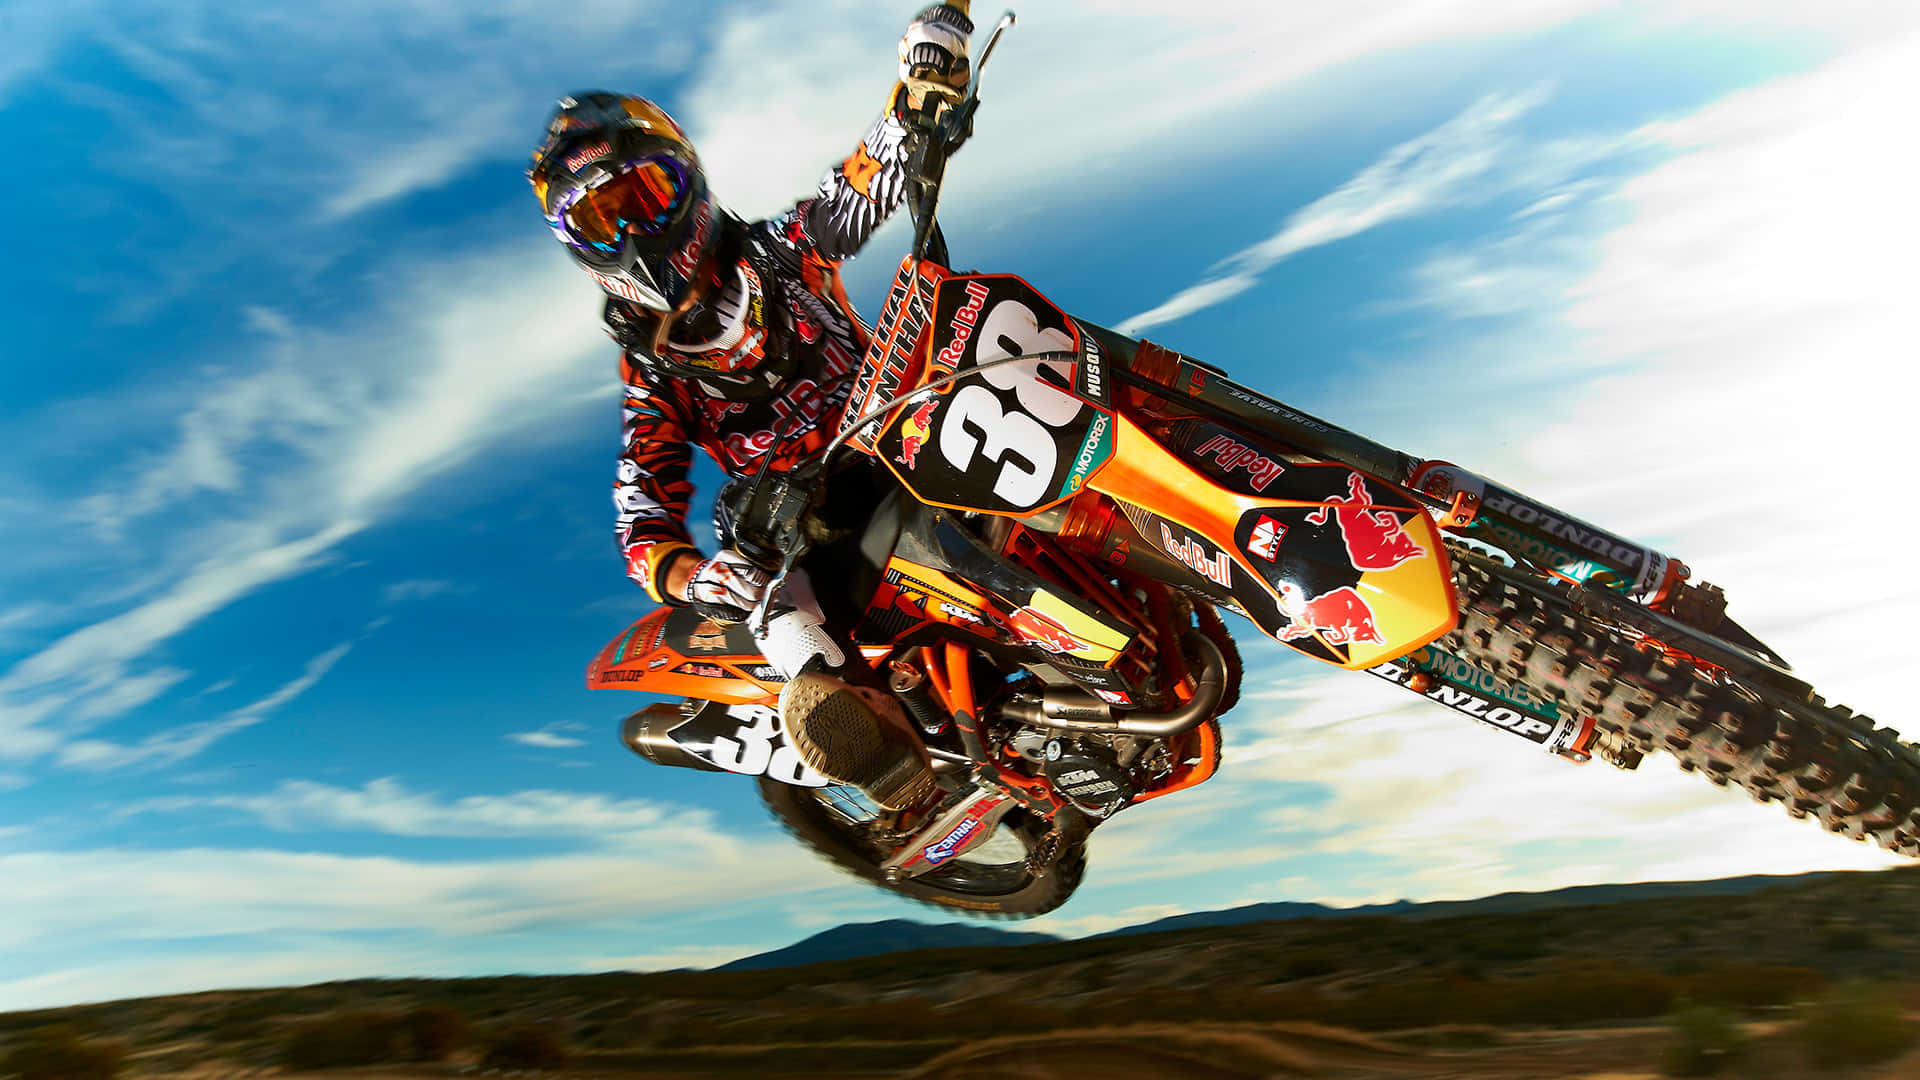 A professional dirt biker in action on a motocross track